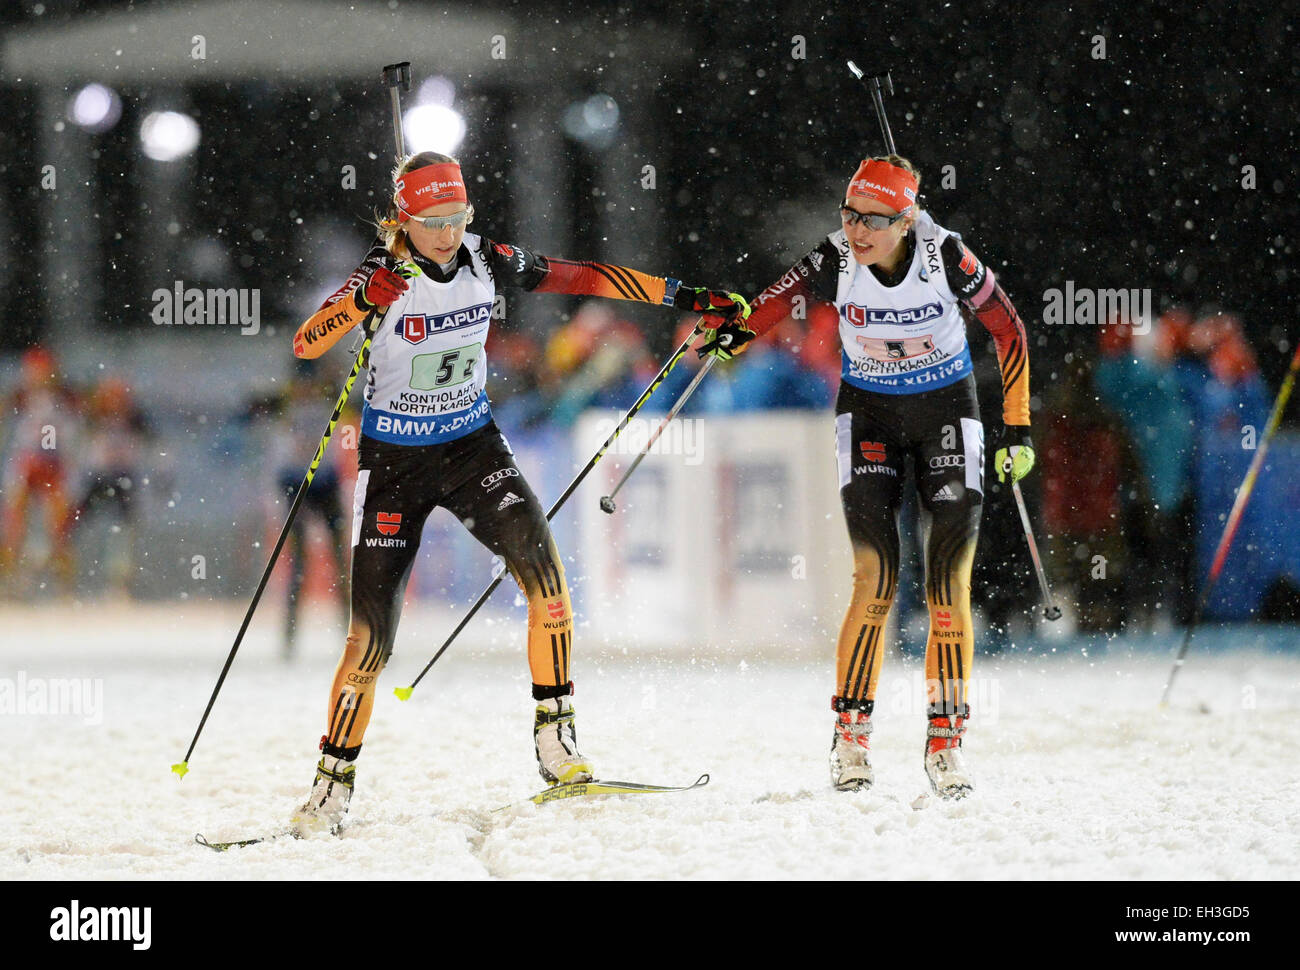 Kontiolahti, Finland. 05th Mar, 2015. Biathletes Luis Kummer (R) and Franziska Preuss, both of Germany, action during the Mixed Relay competition at the Biathlon World Championships in Kontiolahti, Finland, 05 March 2015. Photo: Ralf Hirschberger/dpa/Alamy Live News Stock Photo